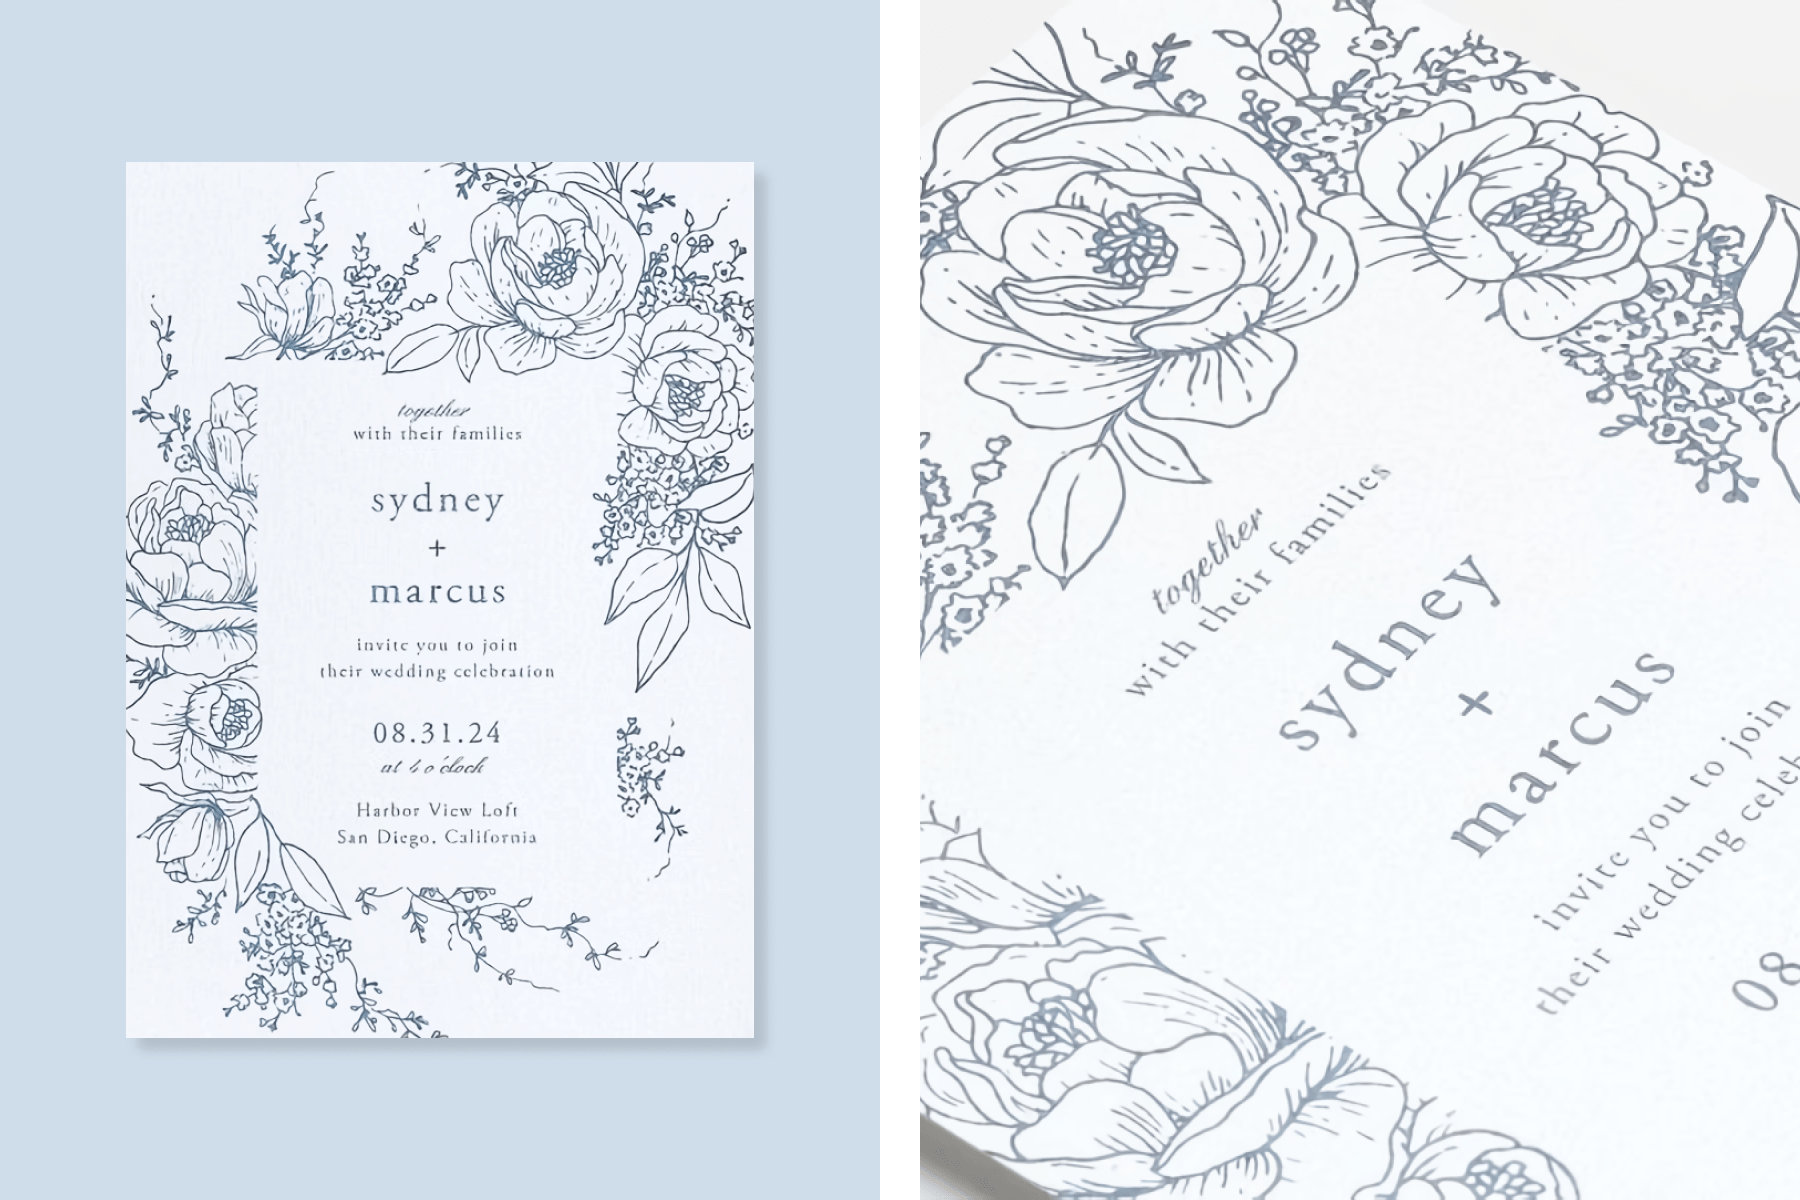 Left: A white wedding invitation with gray rose doodles around the border. Right: The same invitation shown at an angle leaning towards the left.